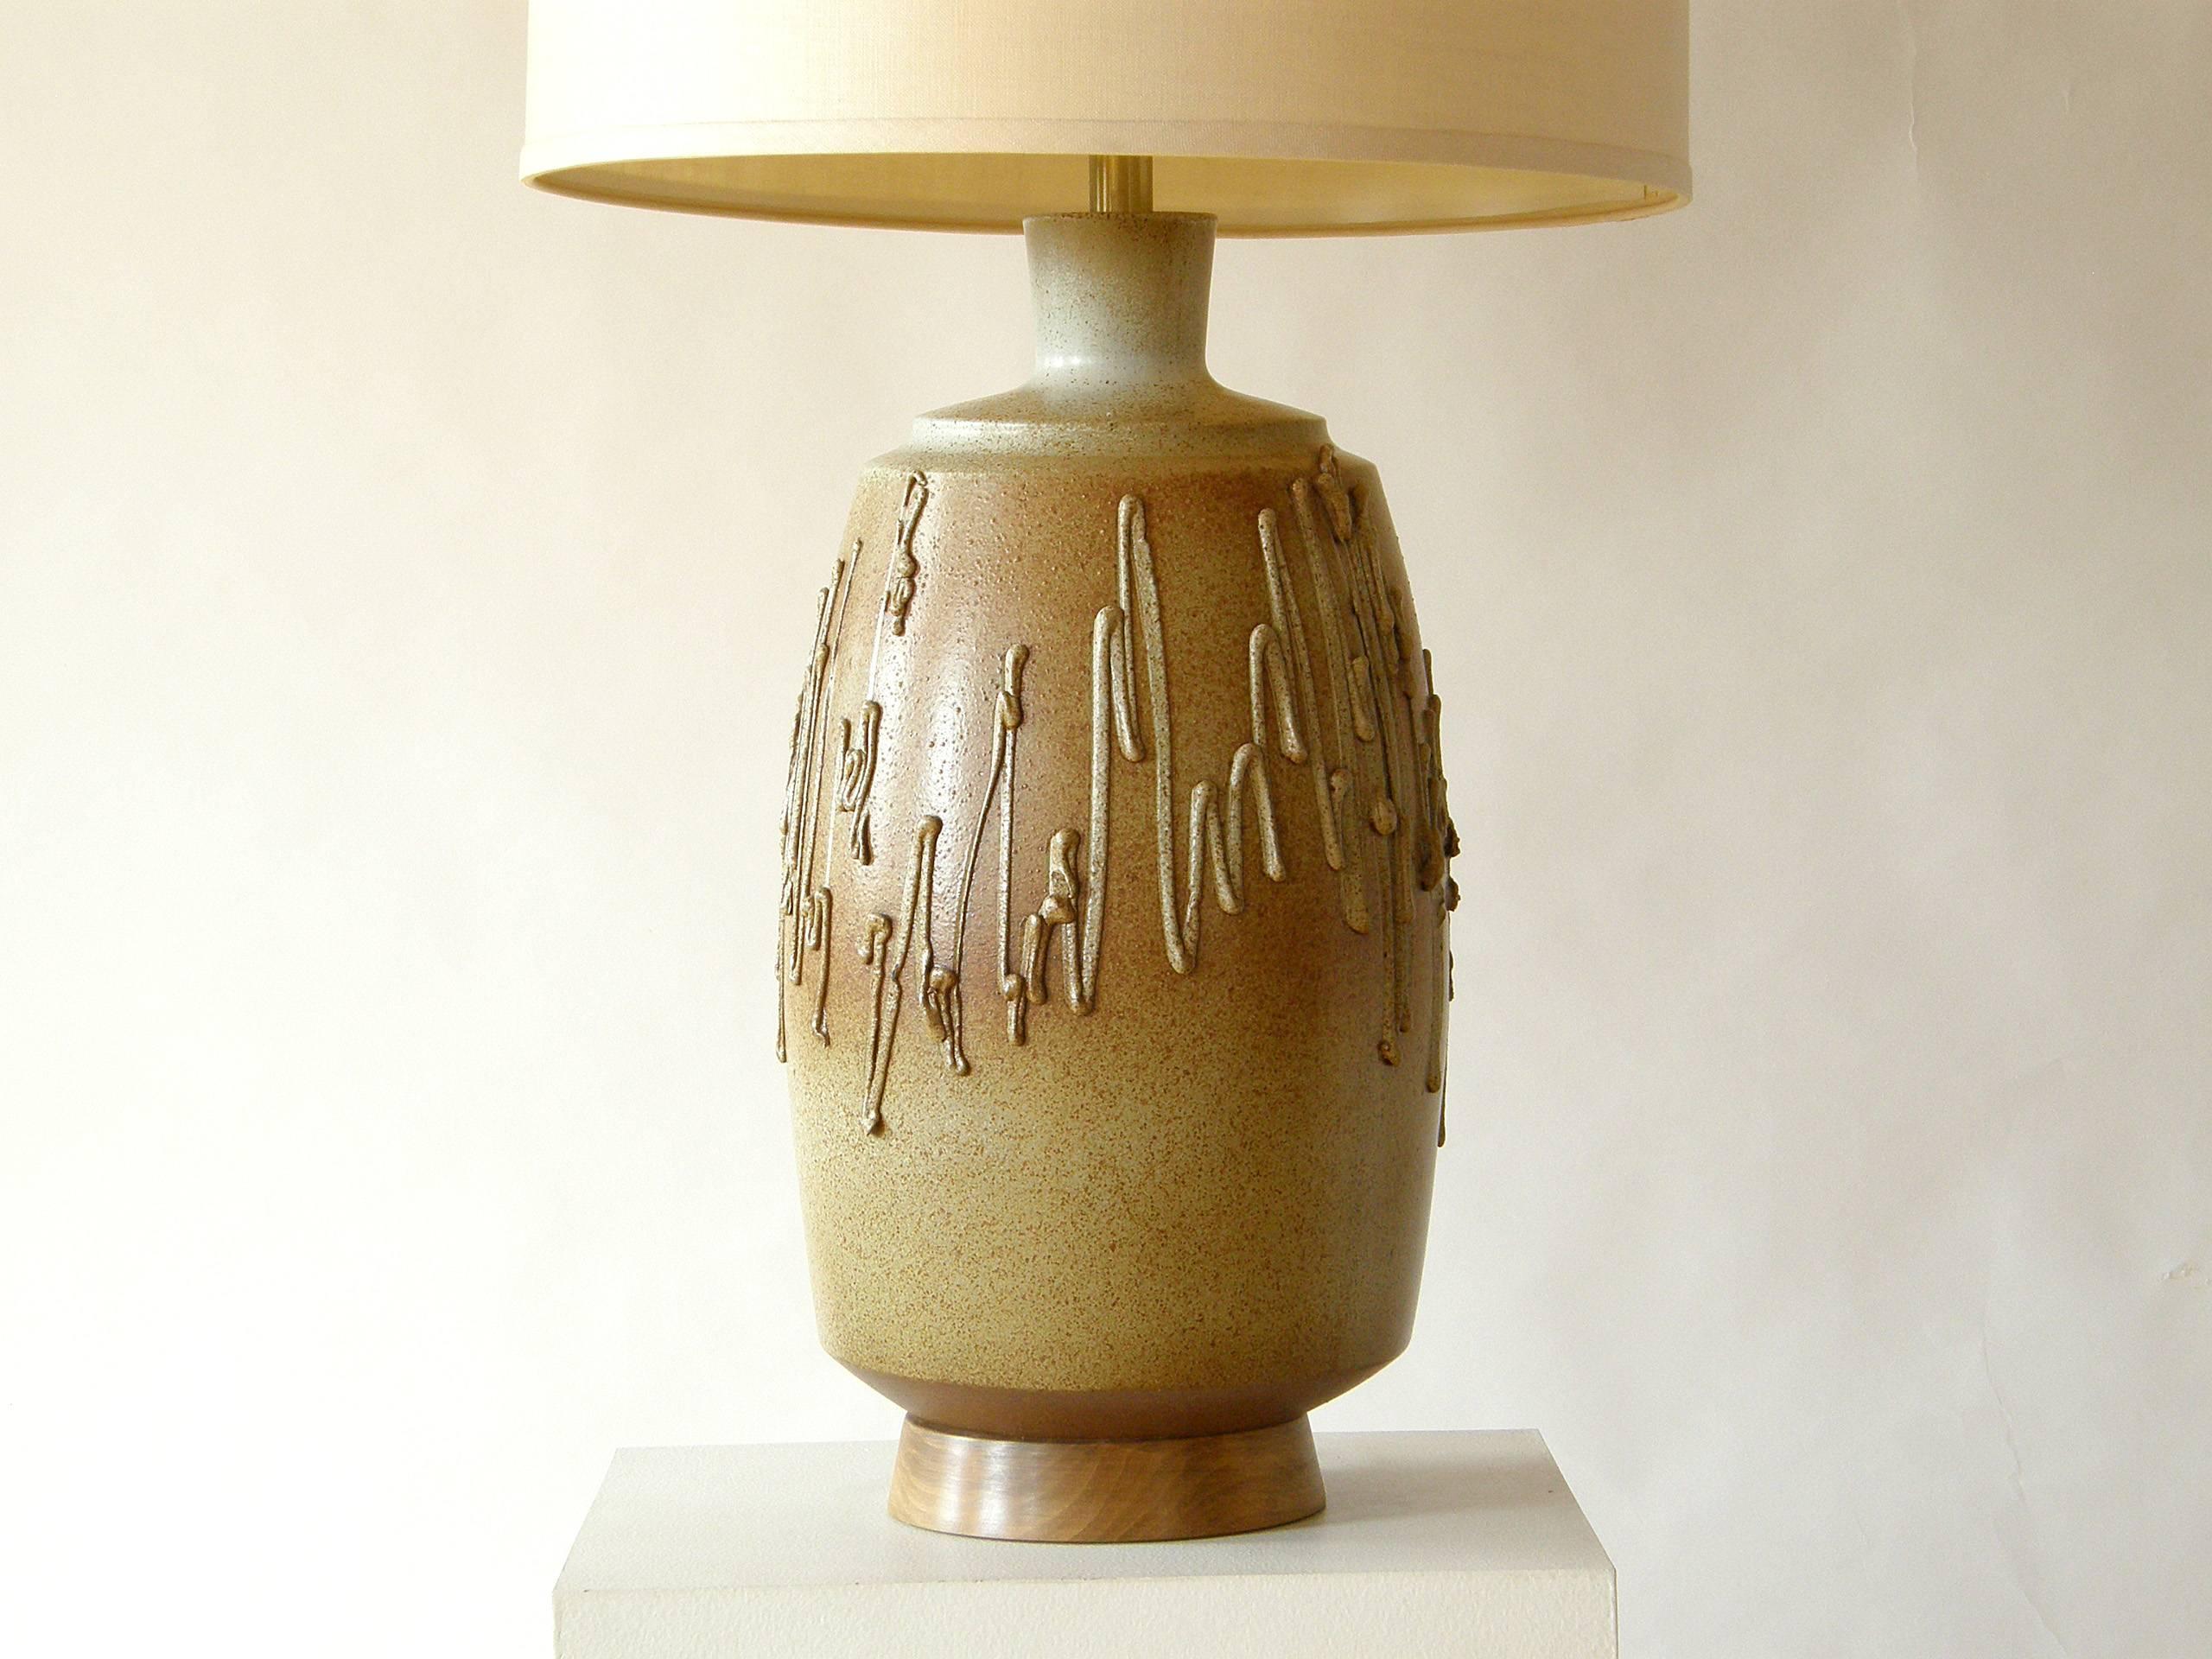 Ceramic table lamp designed by David Cressey for Architectural Pottery. It has a speckled brown glaze over a creamy base color and a textural surface treatment of freely applied squiggles.

The shade pictured on the lamp is for display purposes